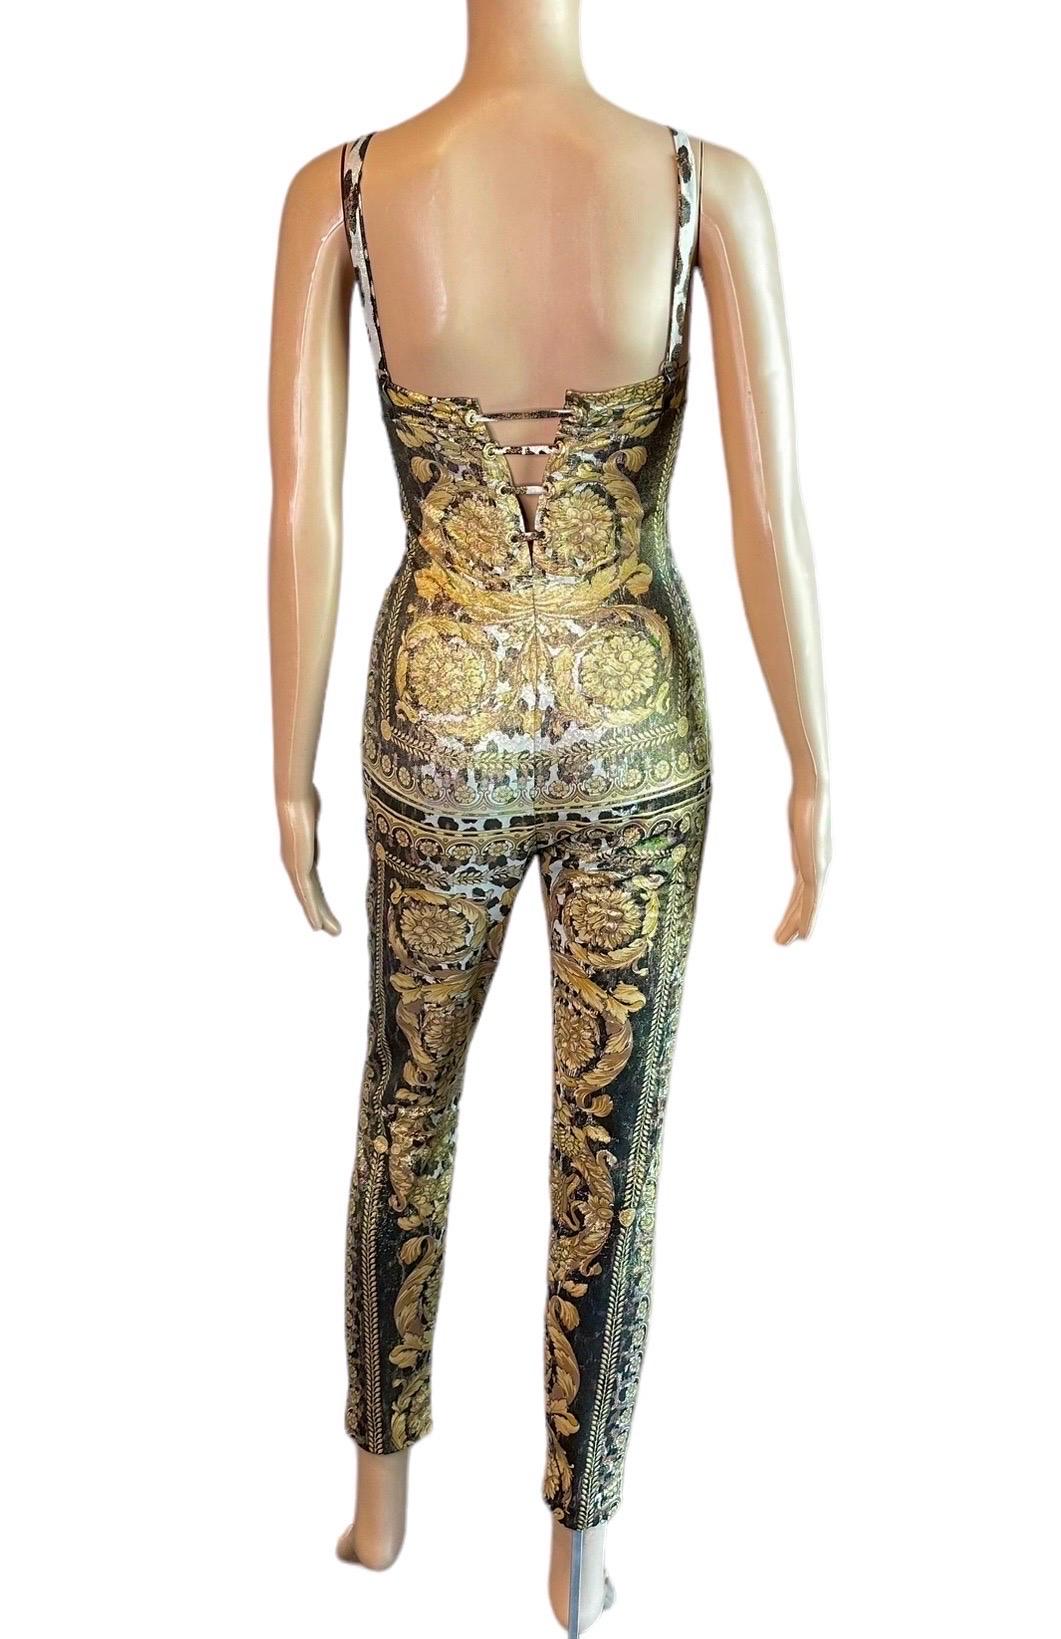 Gianni Versace S/S 1992 Runway Bustier Embellished Baroque Catsuit Jumpsuit For Sale 4